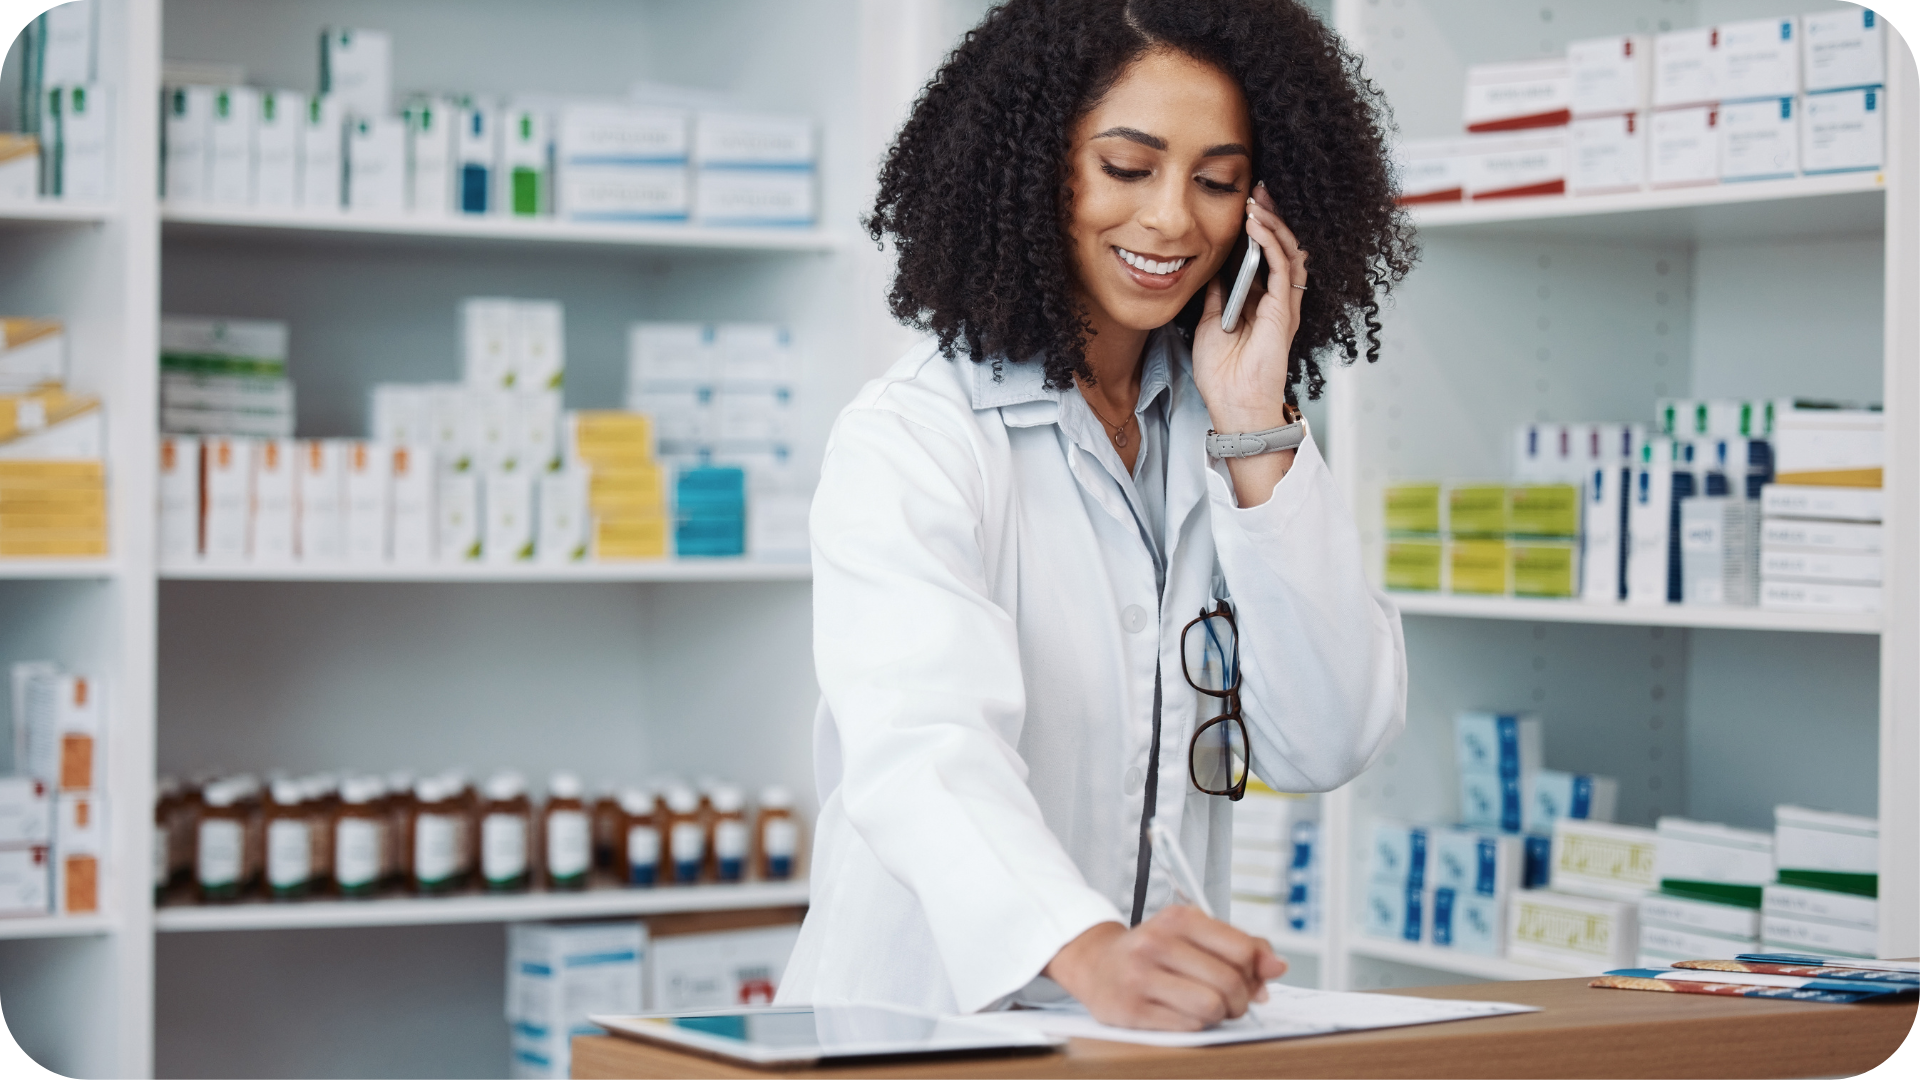 Female pharmacist on the phone taking notes with medications on shelves behind her.